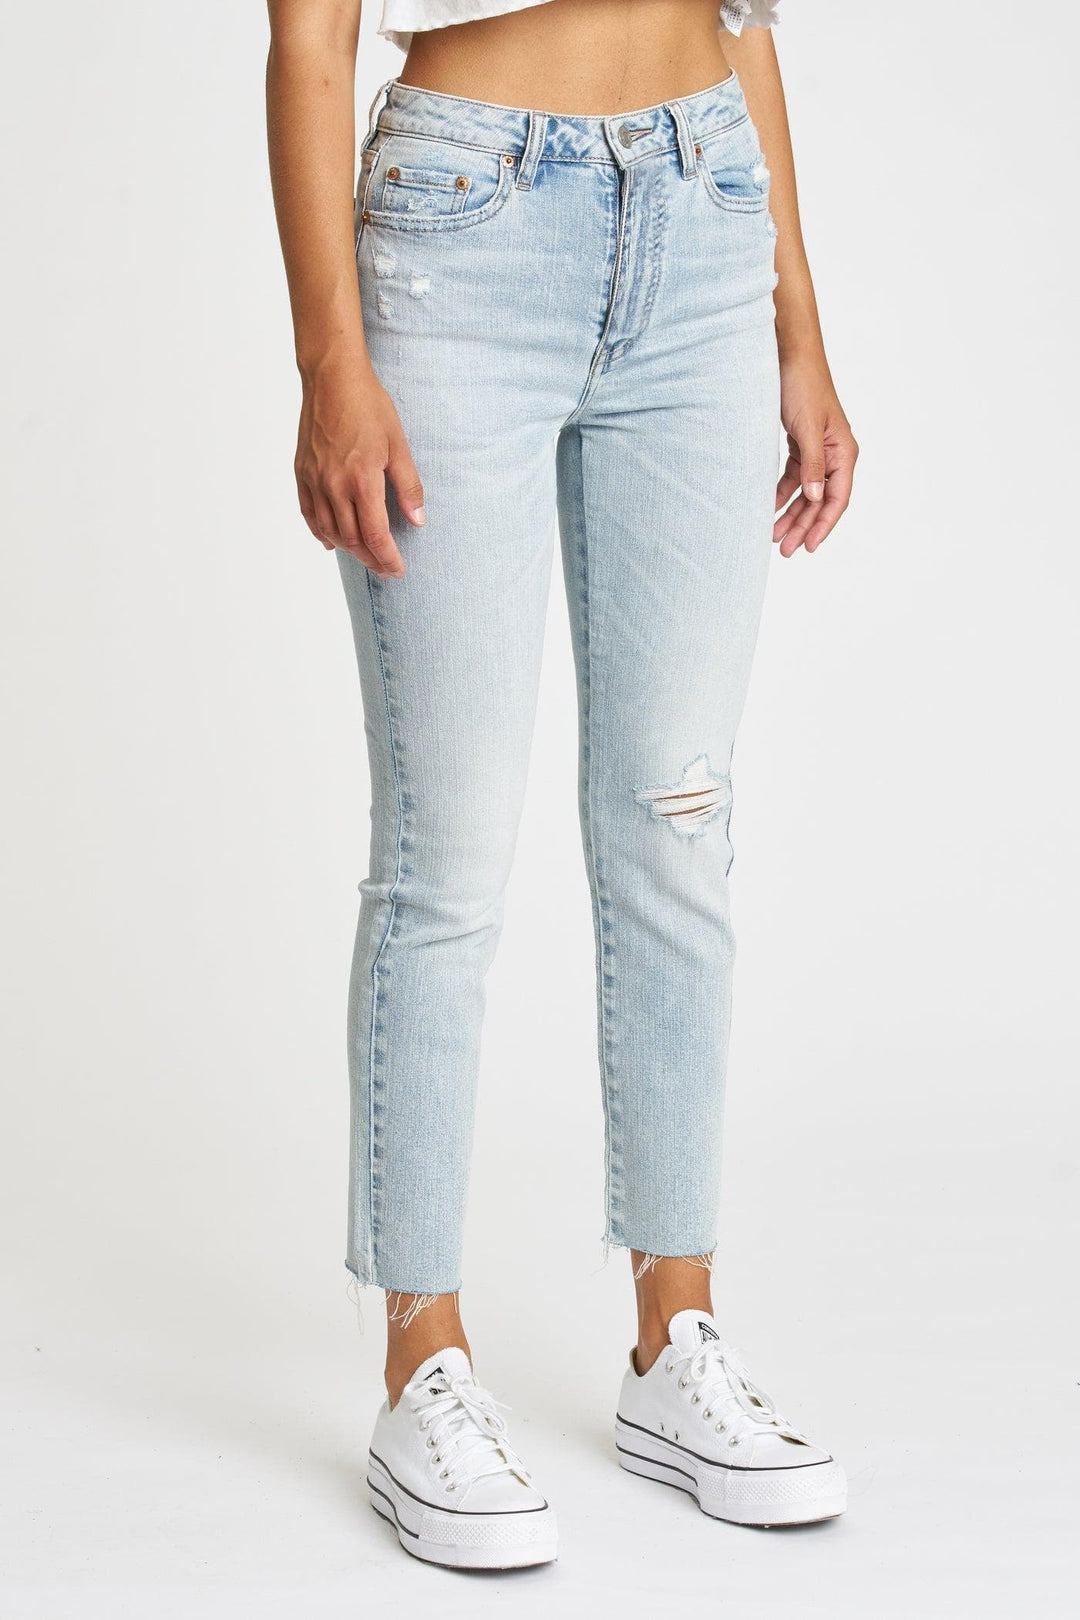 Daily Driver High Rise Jeans by Daze Denim Jeans Scout and Poppy Fashion Boutique